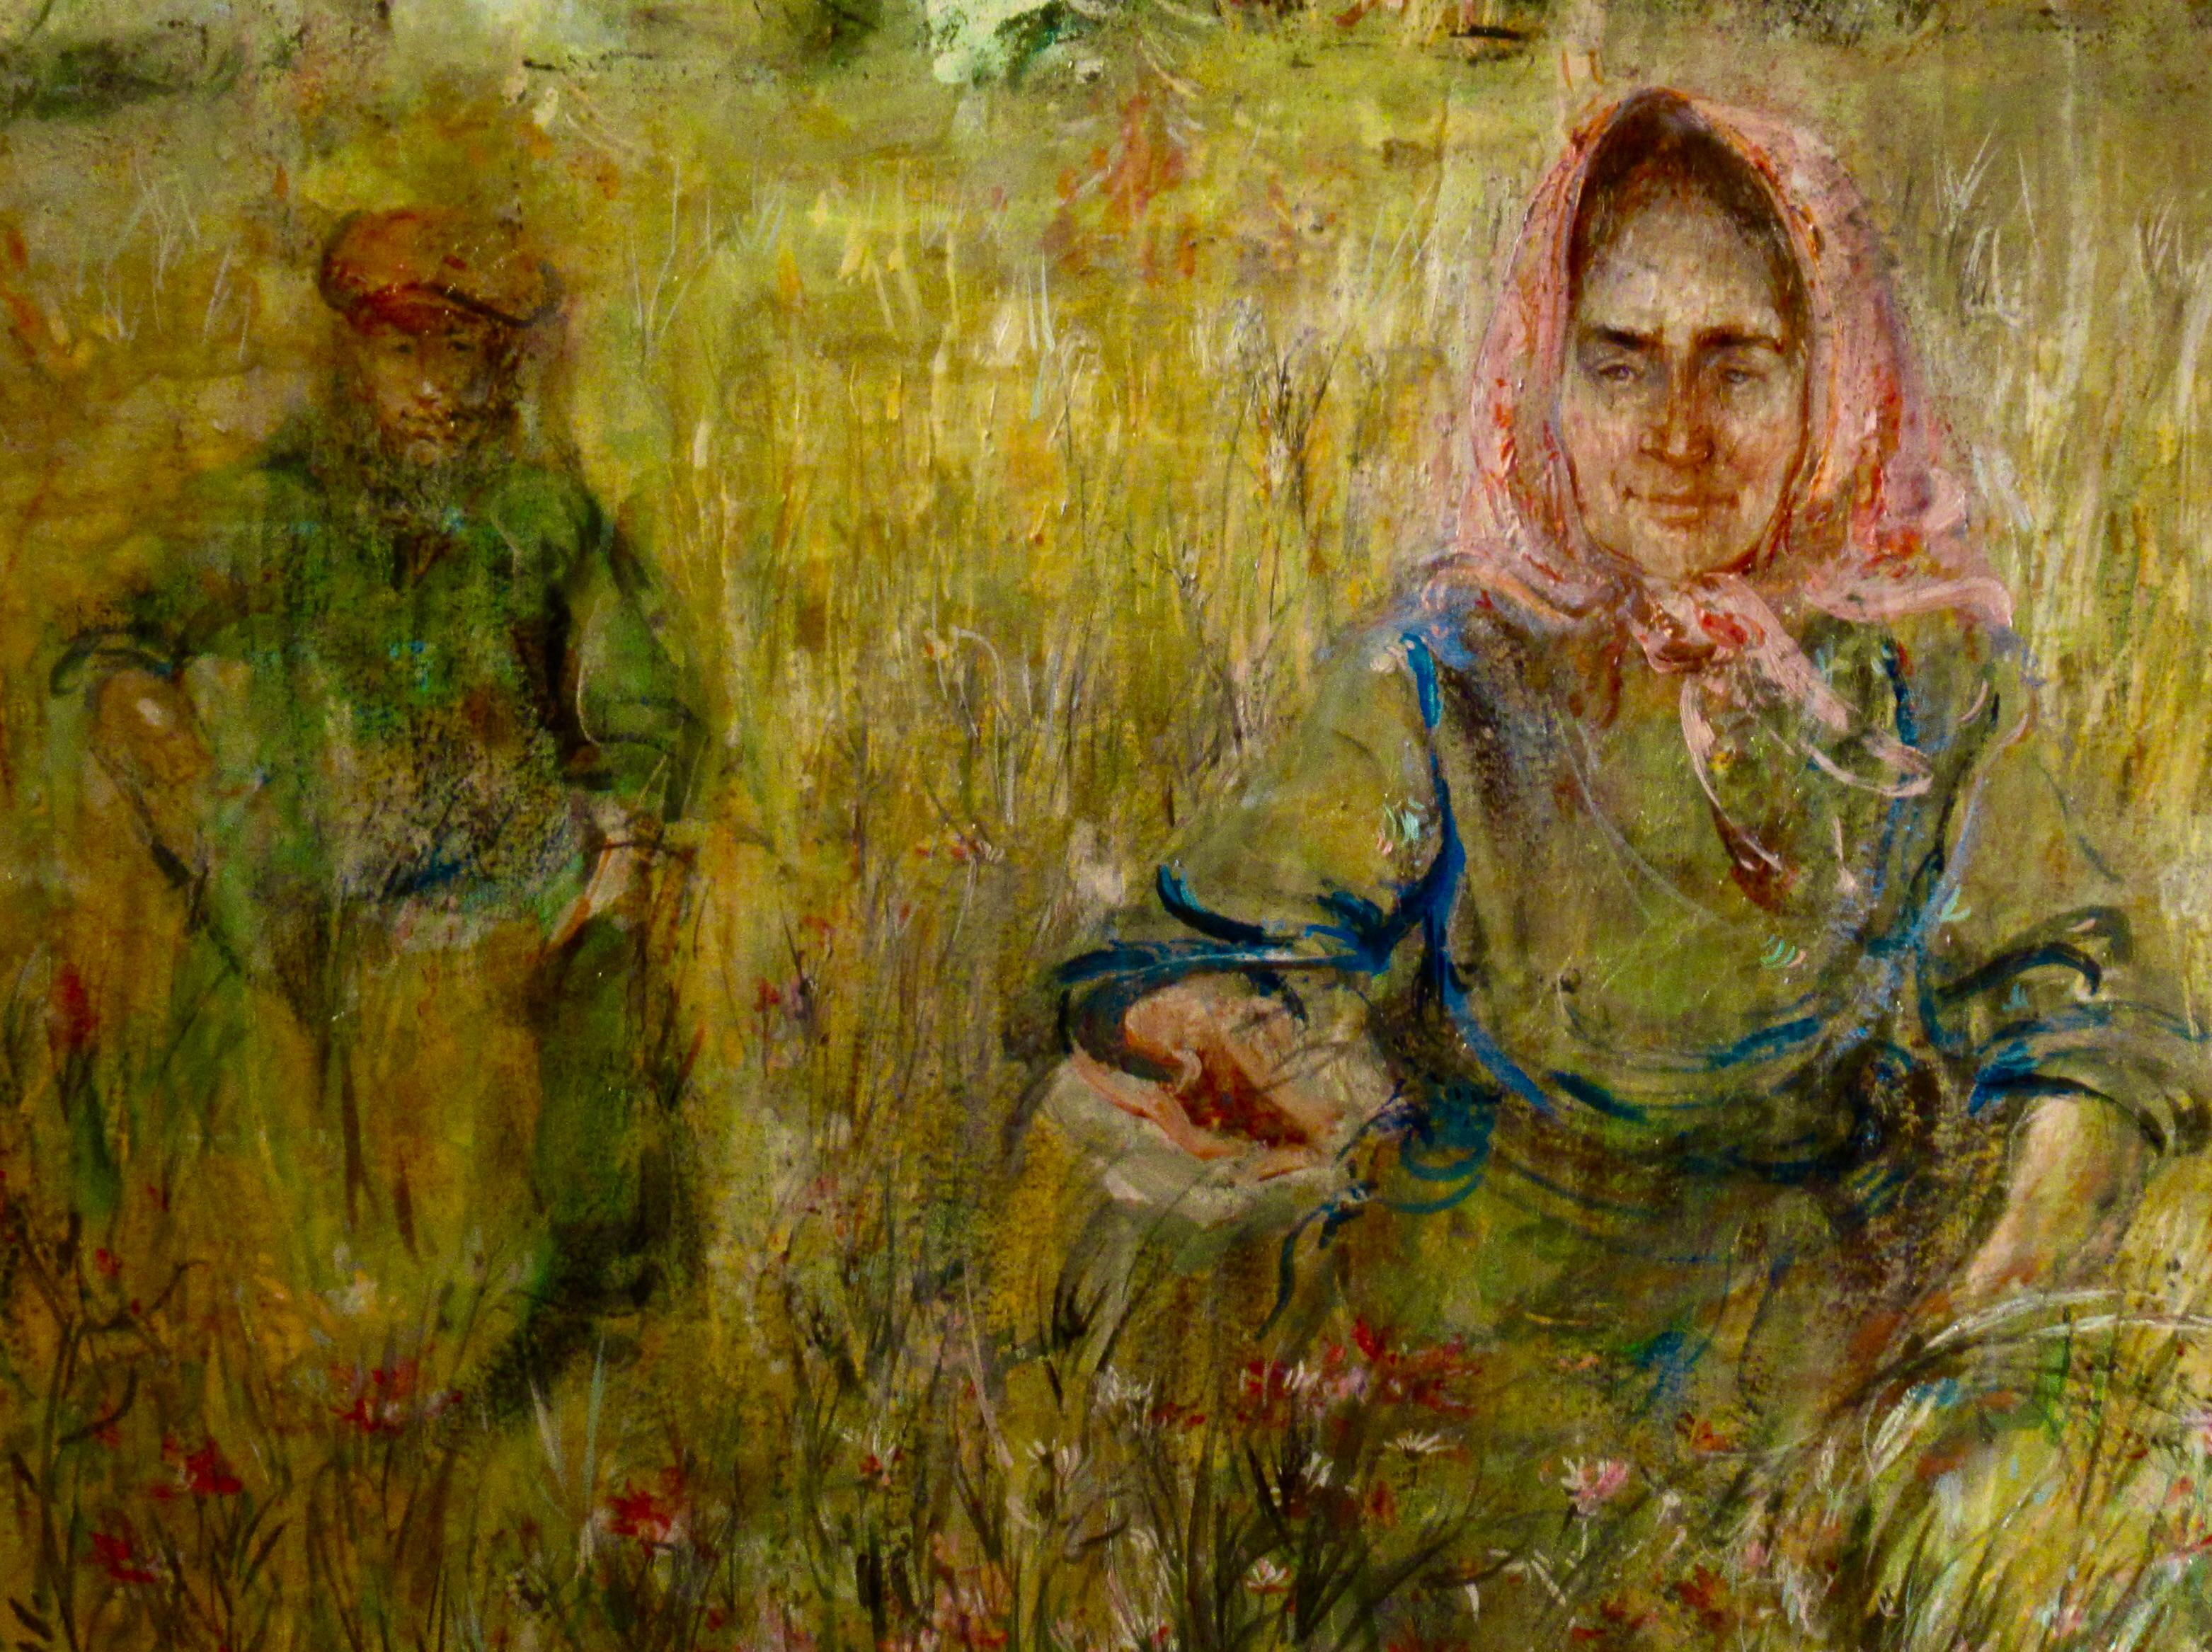 Untitled, Two people in the field - Painting by Edna Hibel